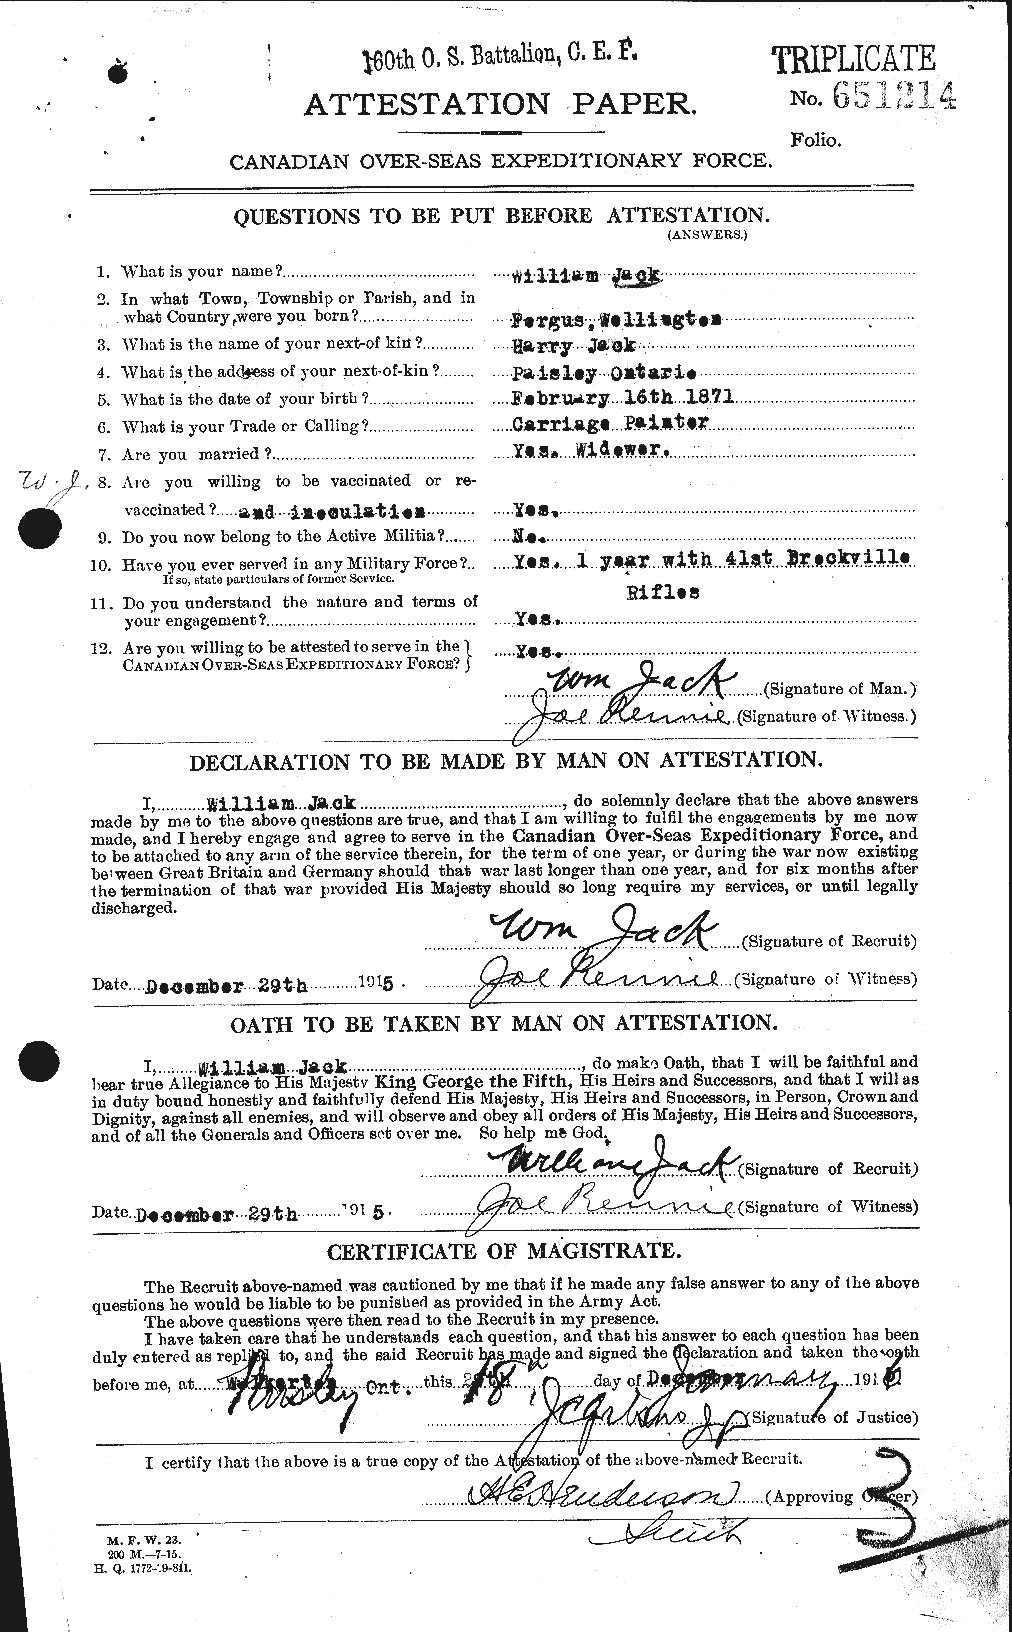 Personnel Records of the First World War - CEF 409772a